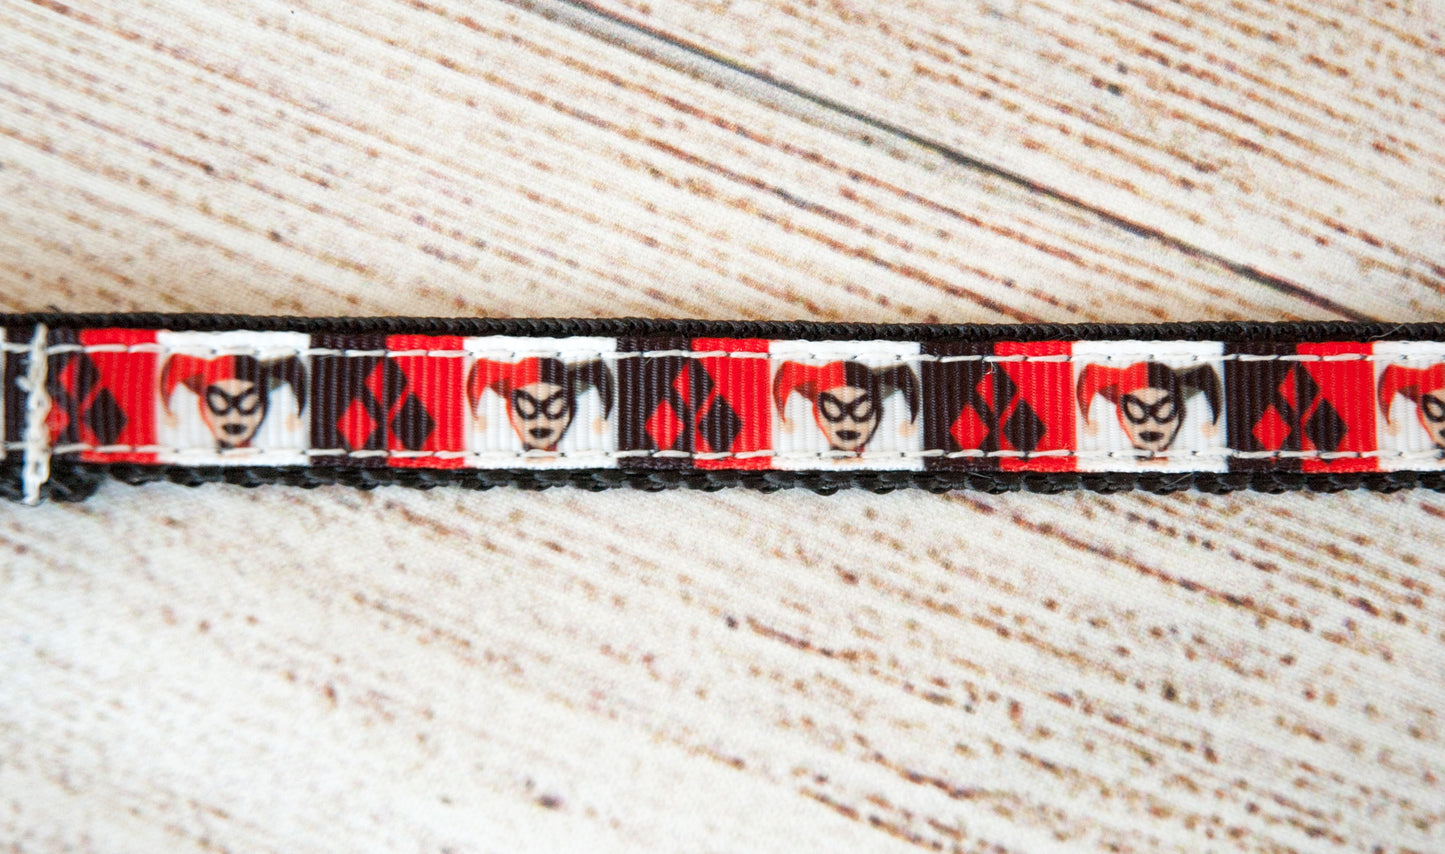 Harlequin collar and /or leash, 1/2" wide for small pets.